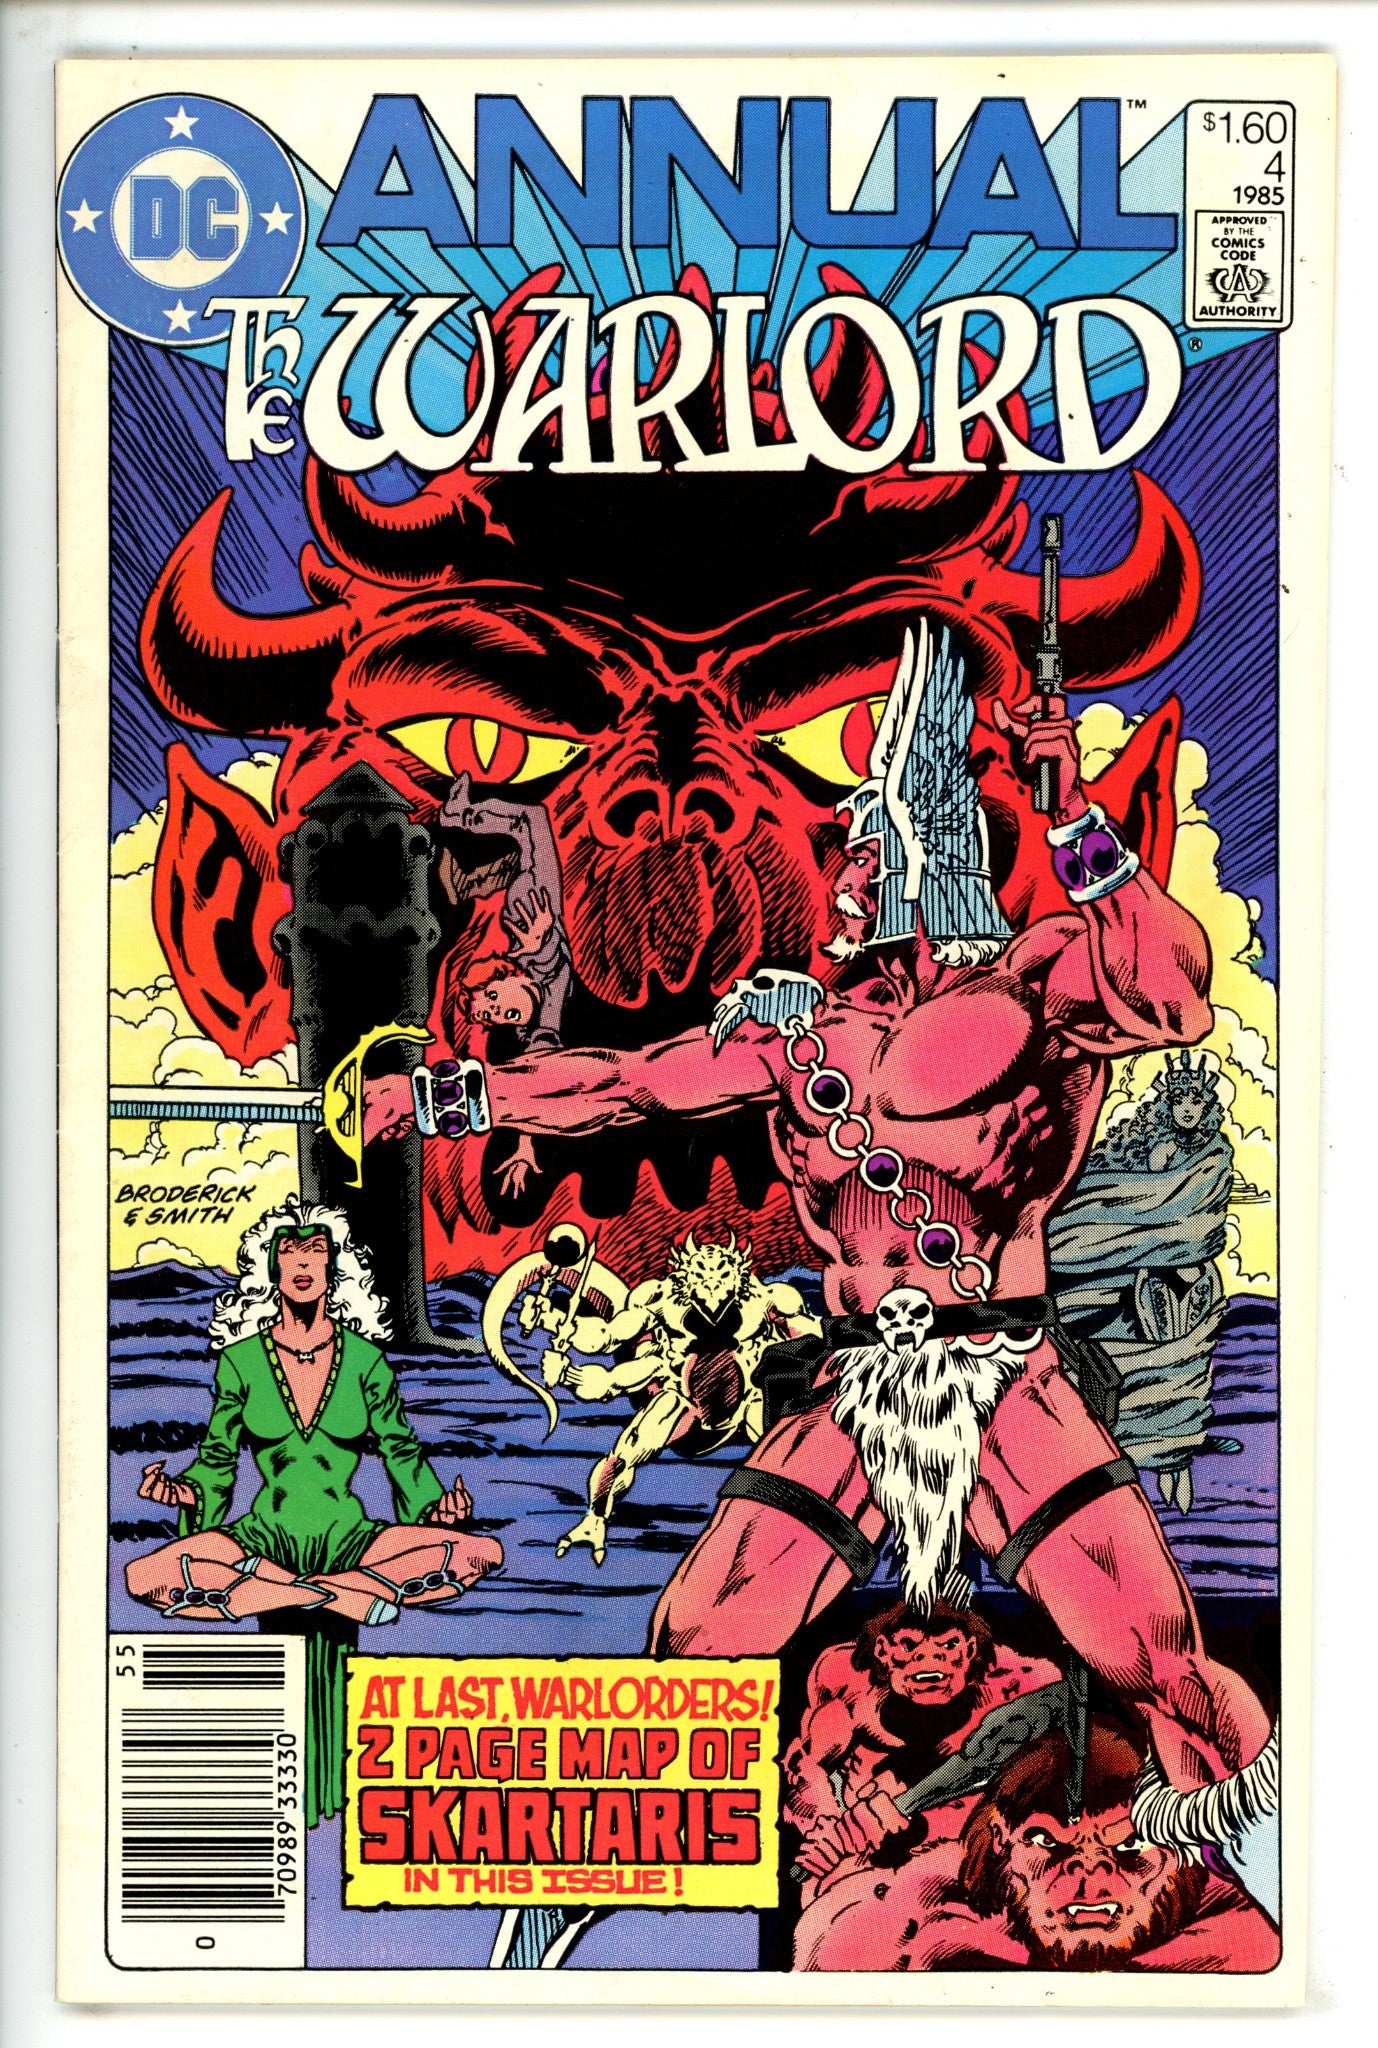 Warlord Annual Vol 1 4 Canadian Variant FN+ (1985)